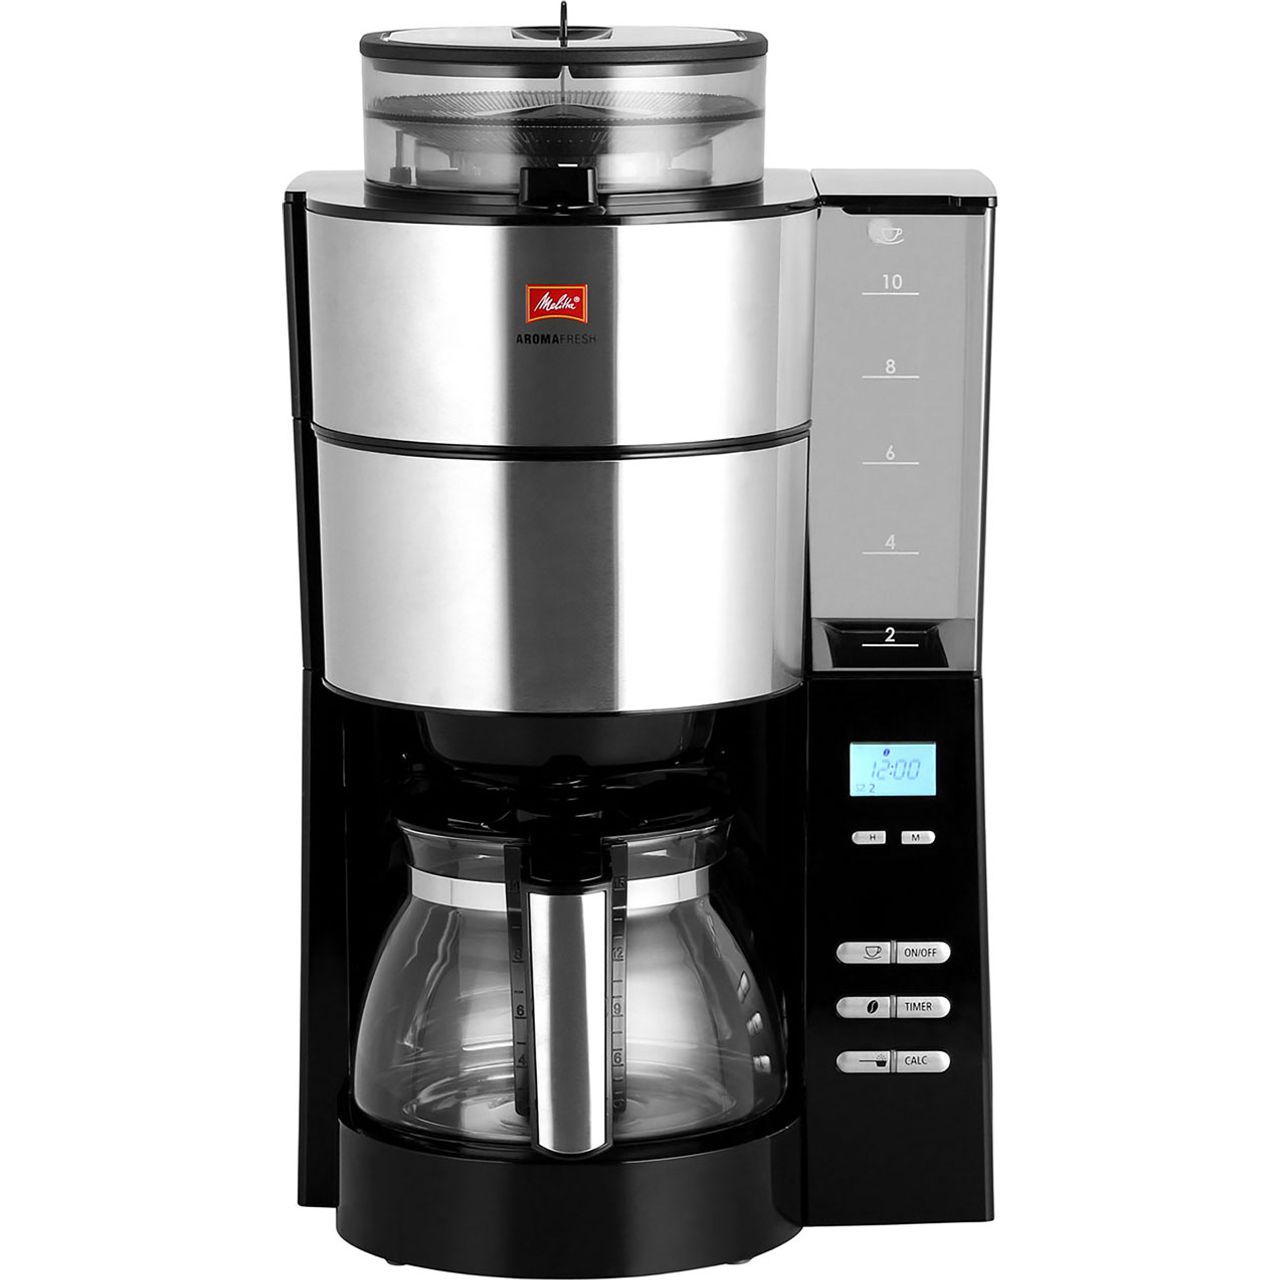 Melitta Grind & Brew 6760642 Filter Coffee Machine with Timer Review